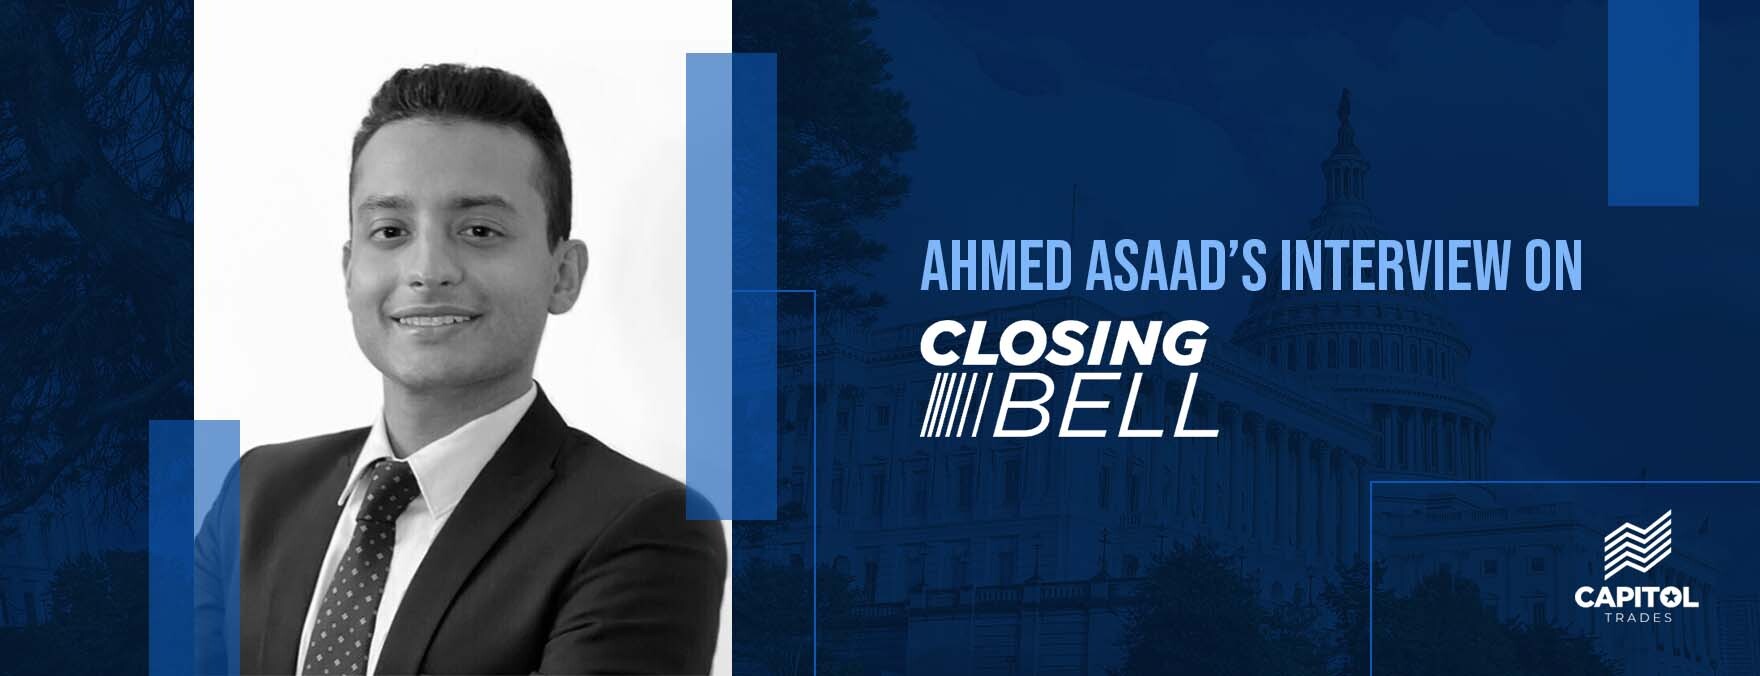 A picture of Ahmed Asaad, a member of 2iQ, is displayed on the left side of the blue and white themed image, and the information about the interview on Closing Bell is written on the left